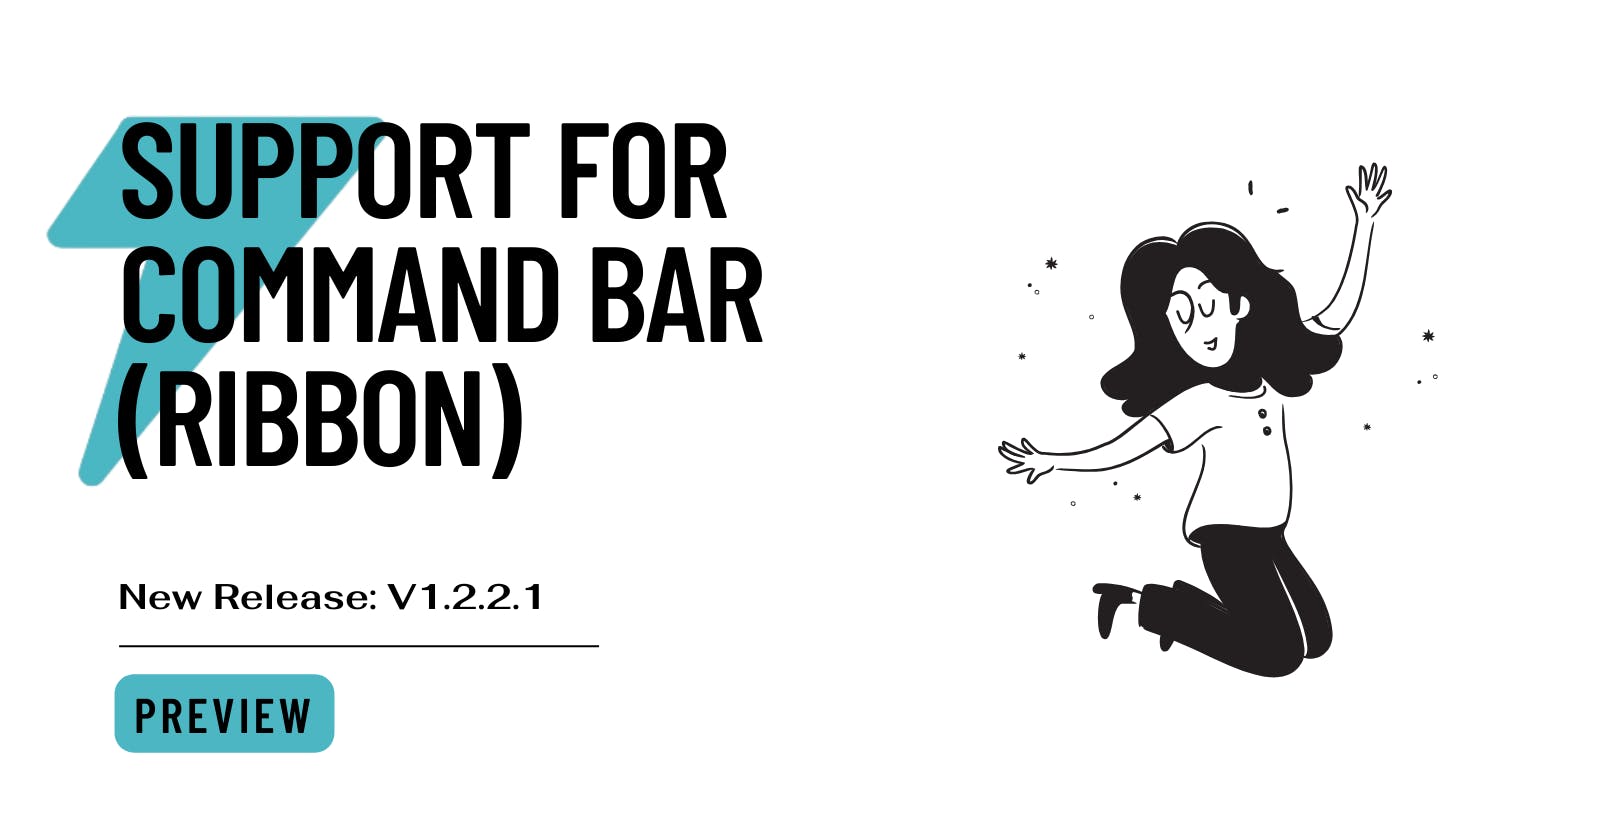 New Release: Supporting Command Bar (Ribbon)